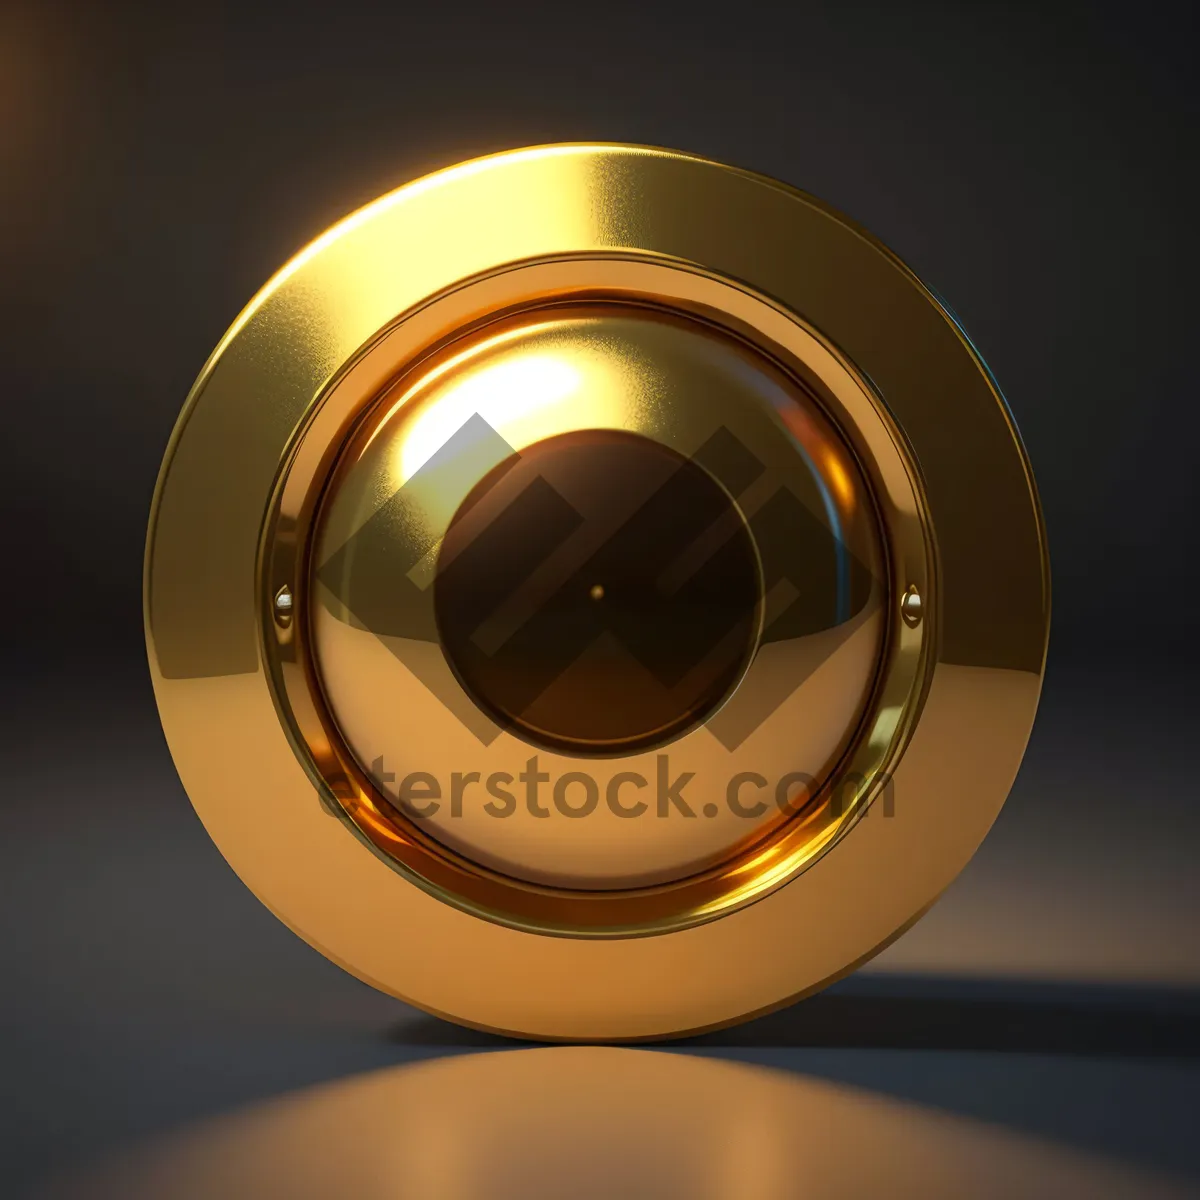 Picture of Digital Music Circle: Shiny Glass Disk Design